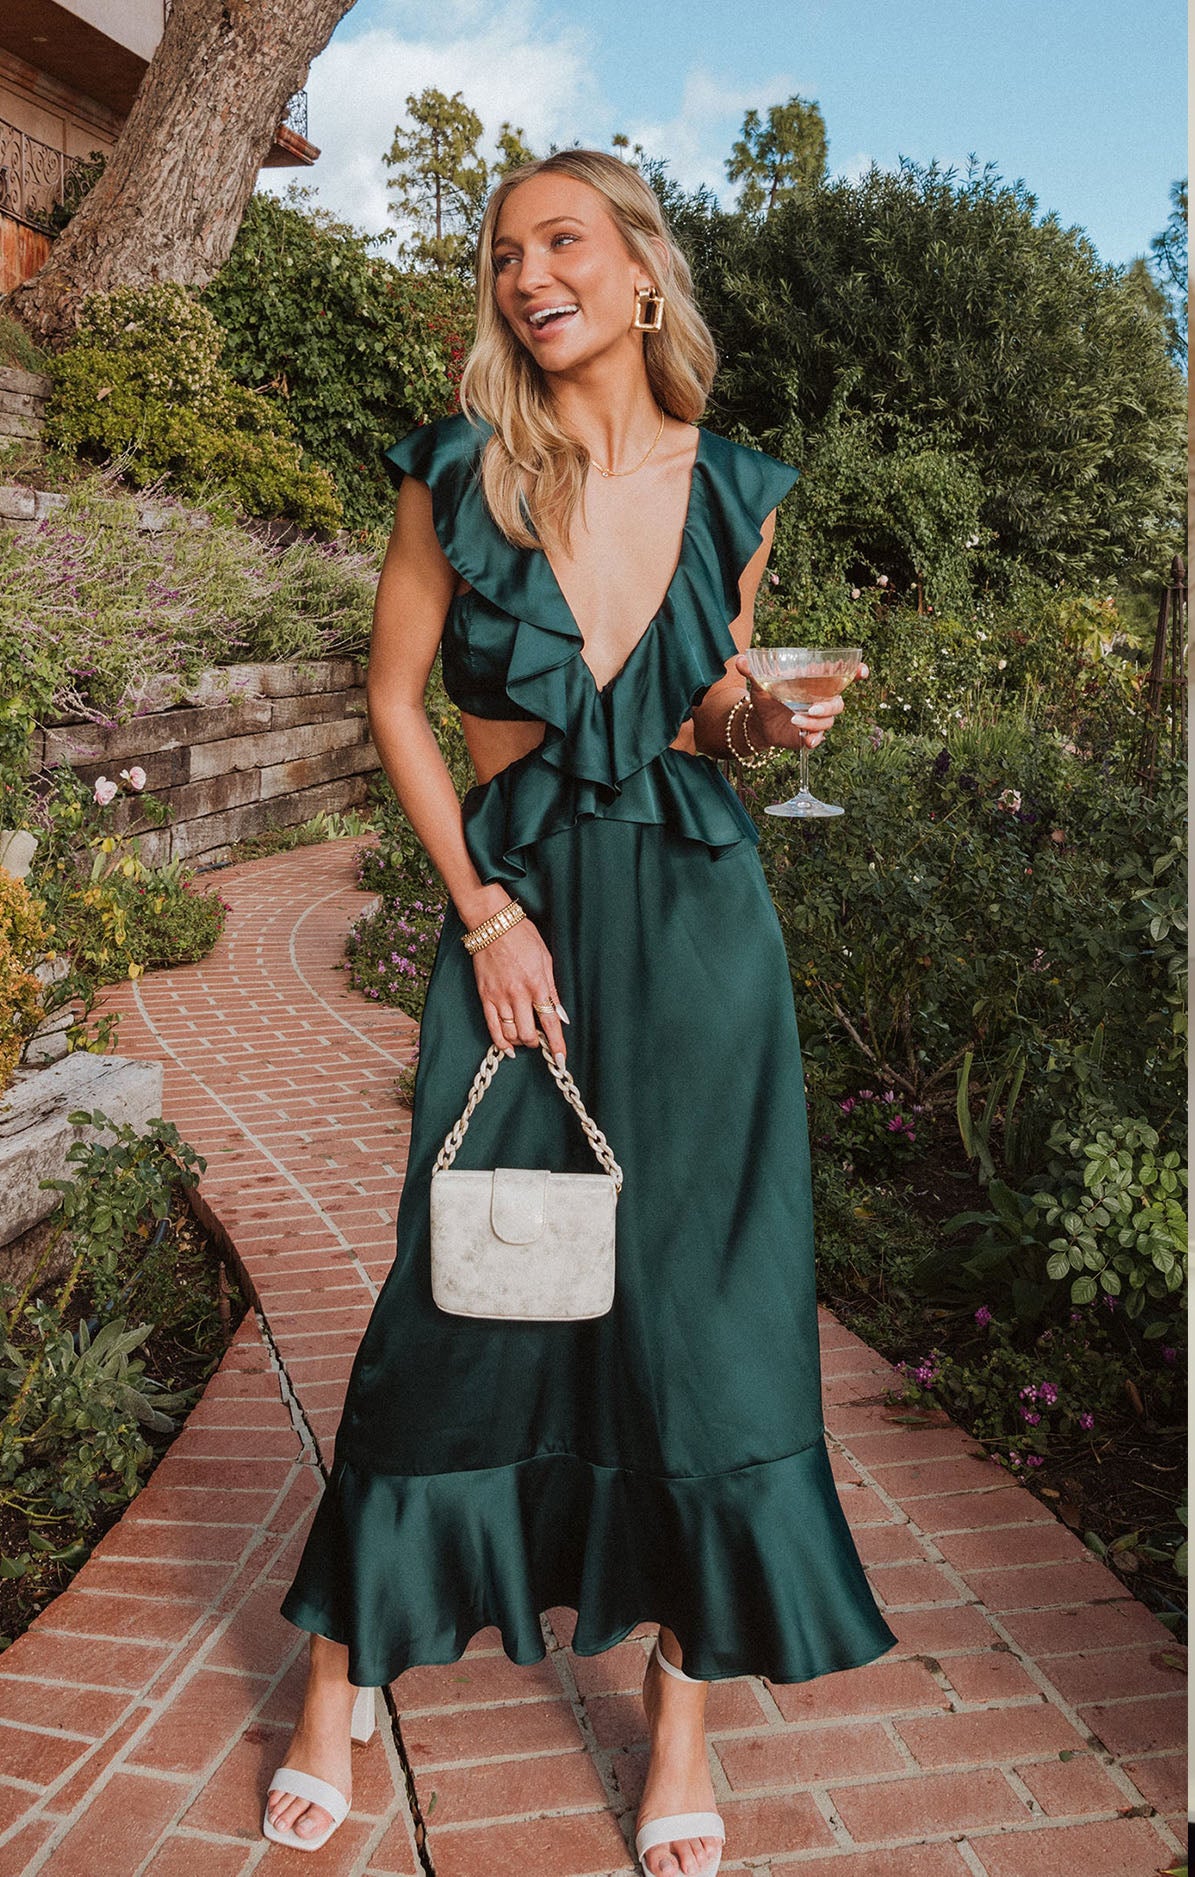 5 WEDDING GUEST OUTFIT IDEAS 